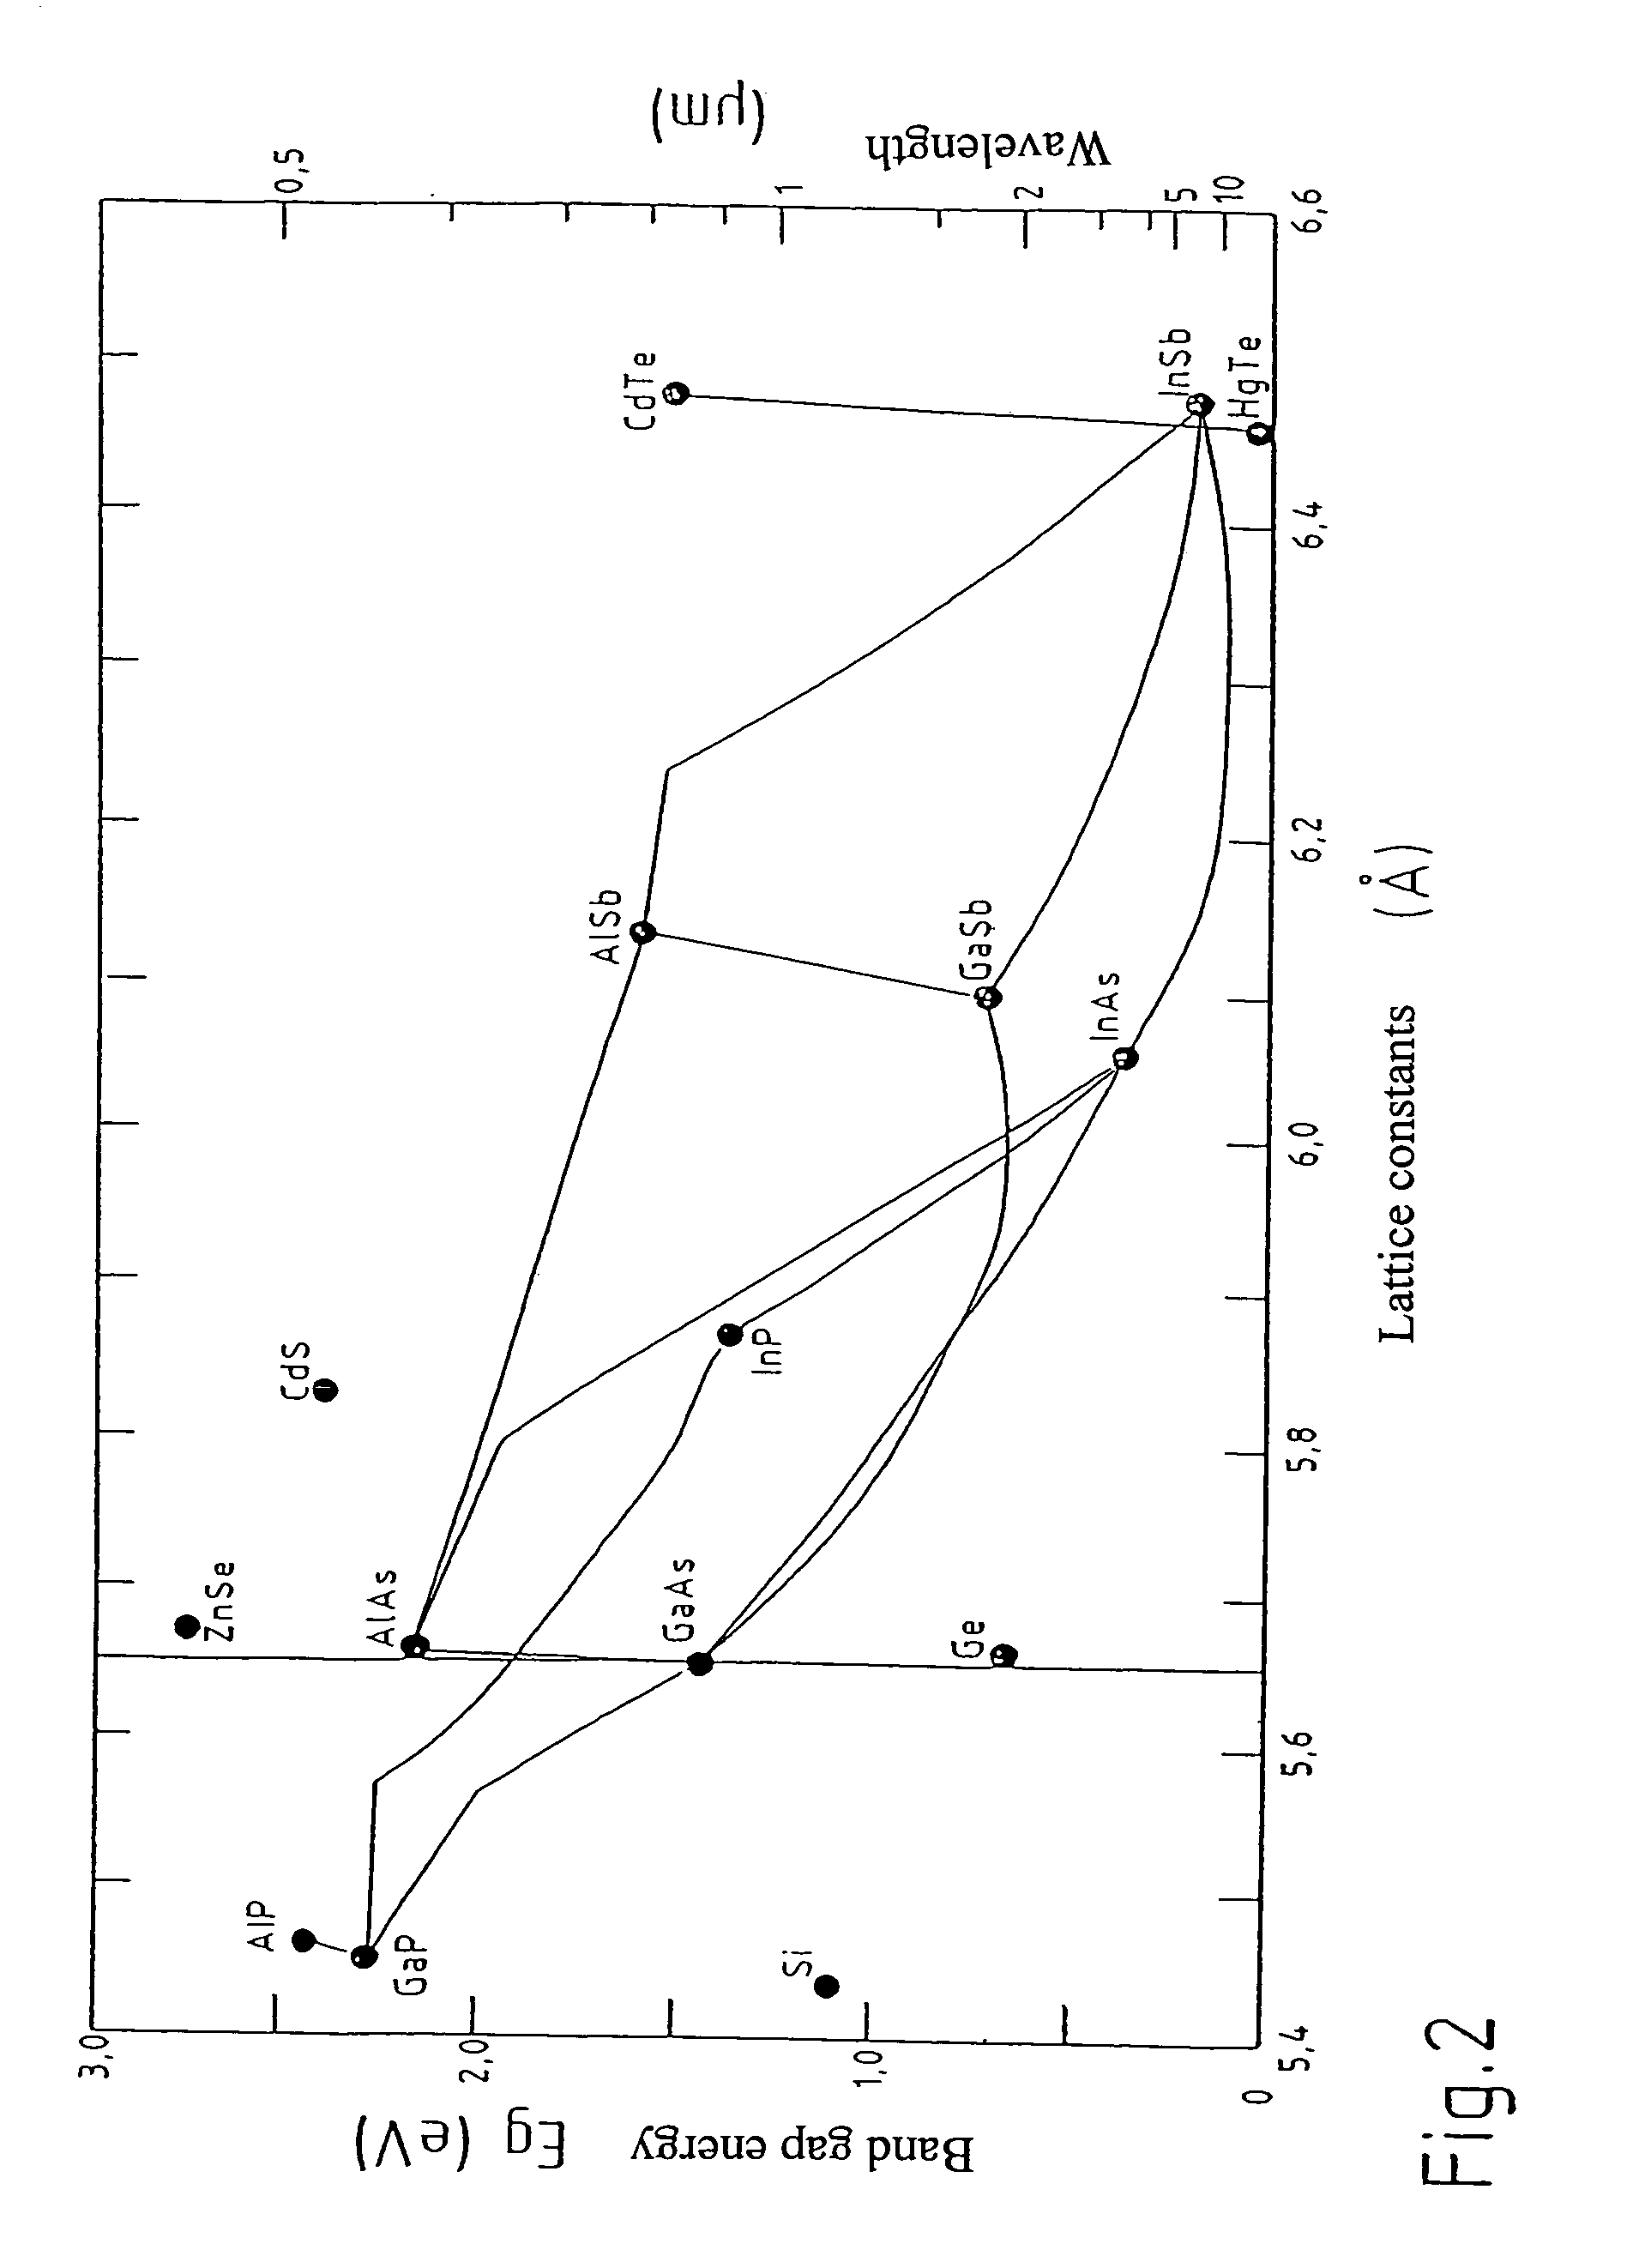 Semiconductor structure comprising active zones